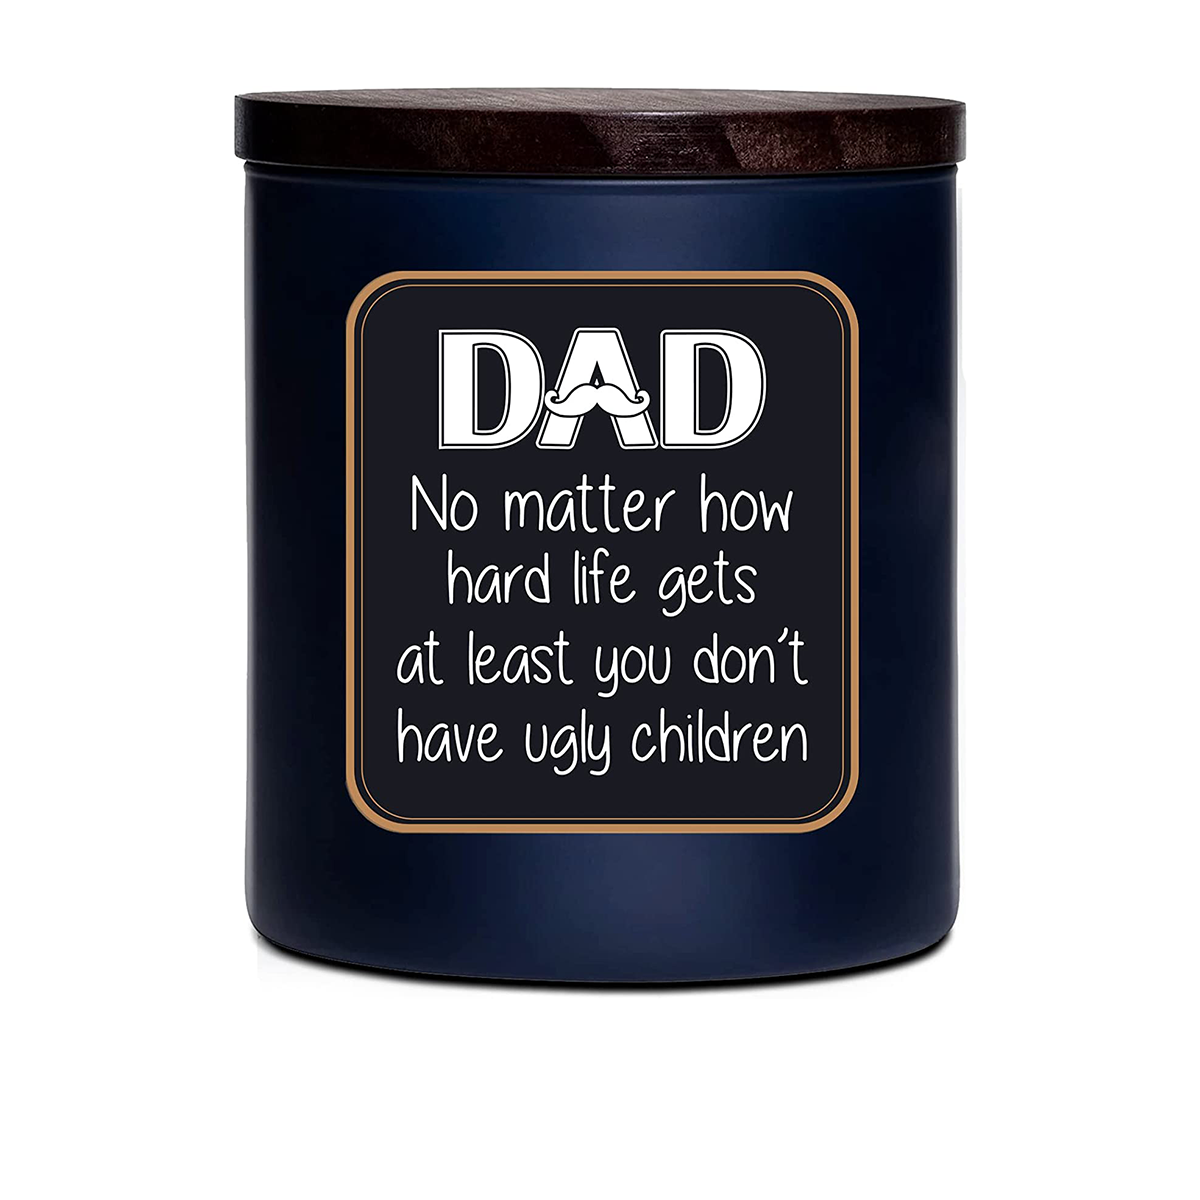 Dad Ugly Children - Father's Day Gifts For Dad - Lavender Candle 8 Oz